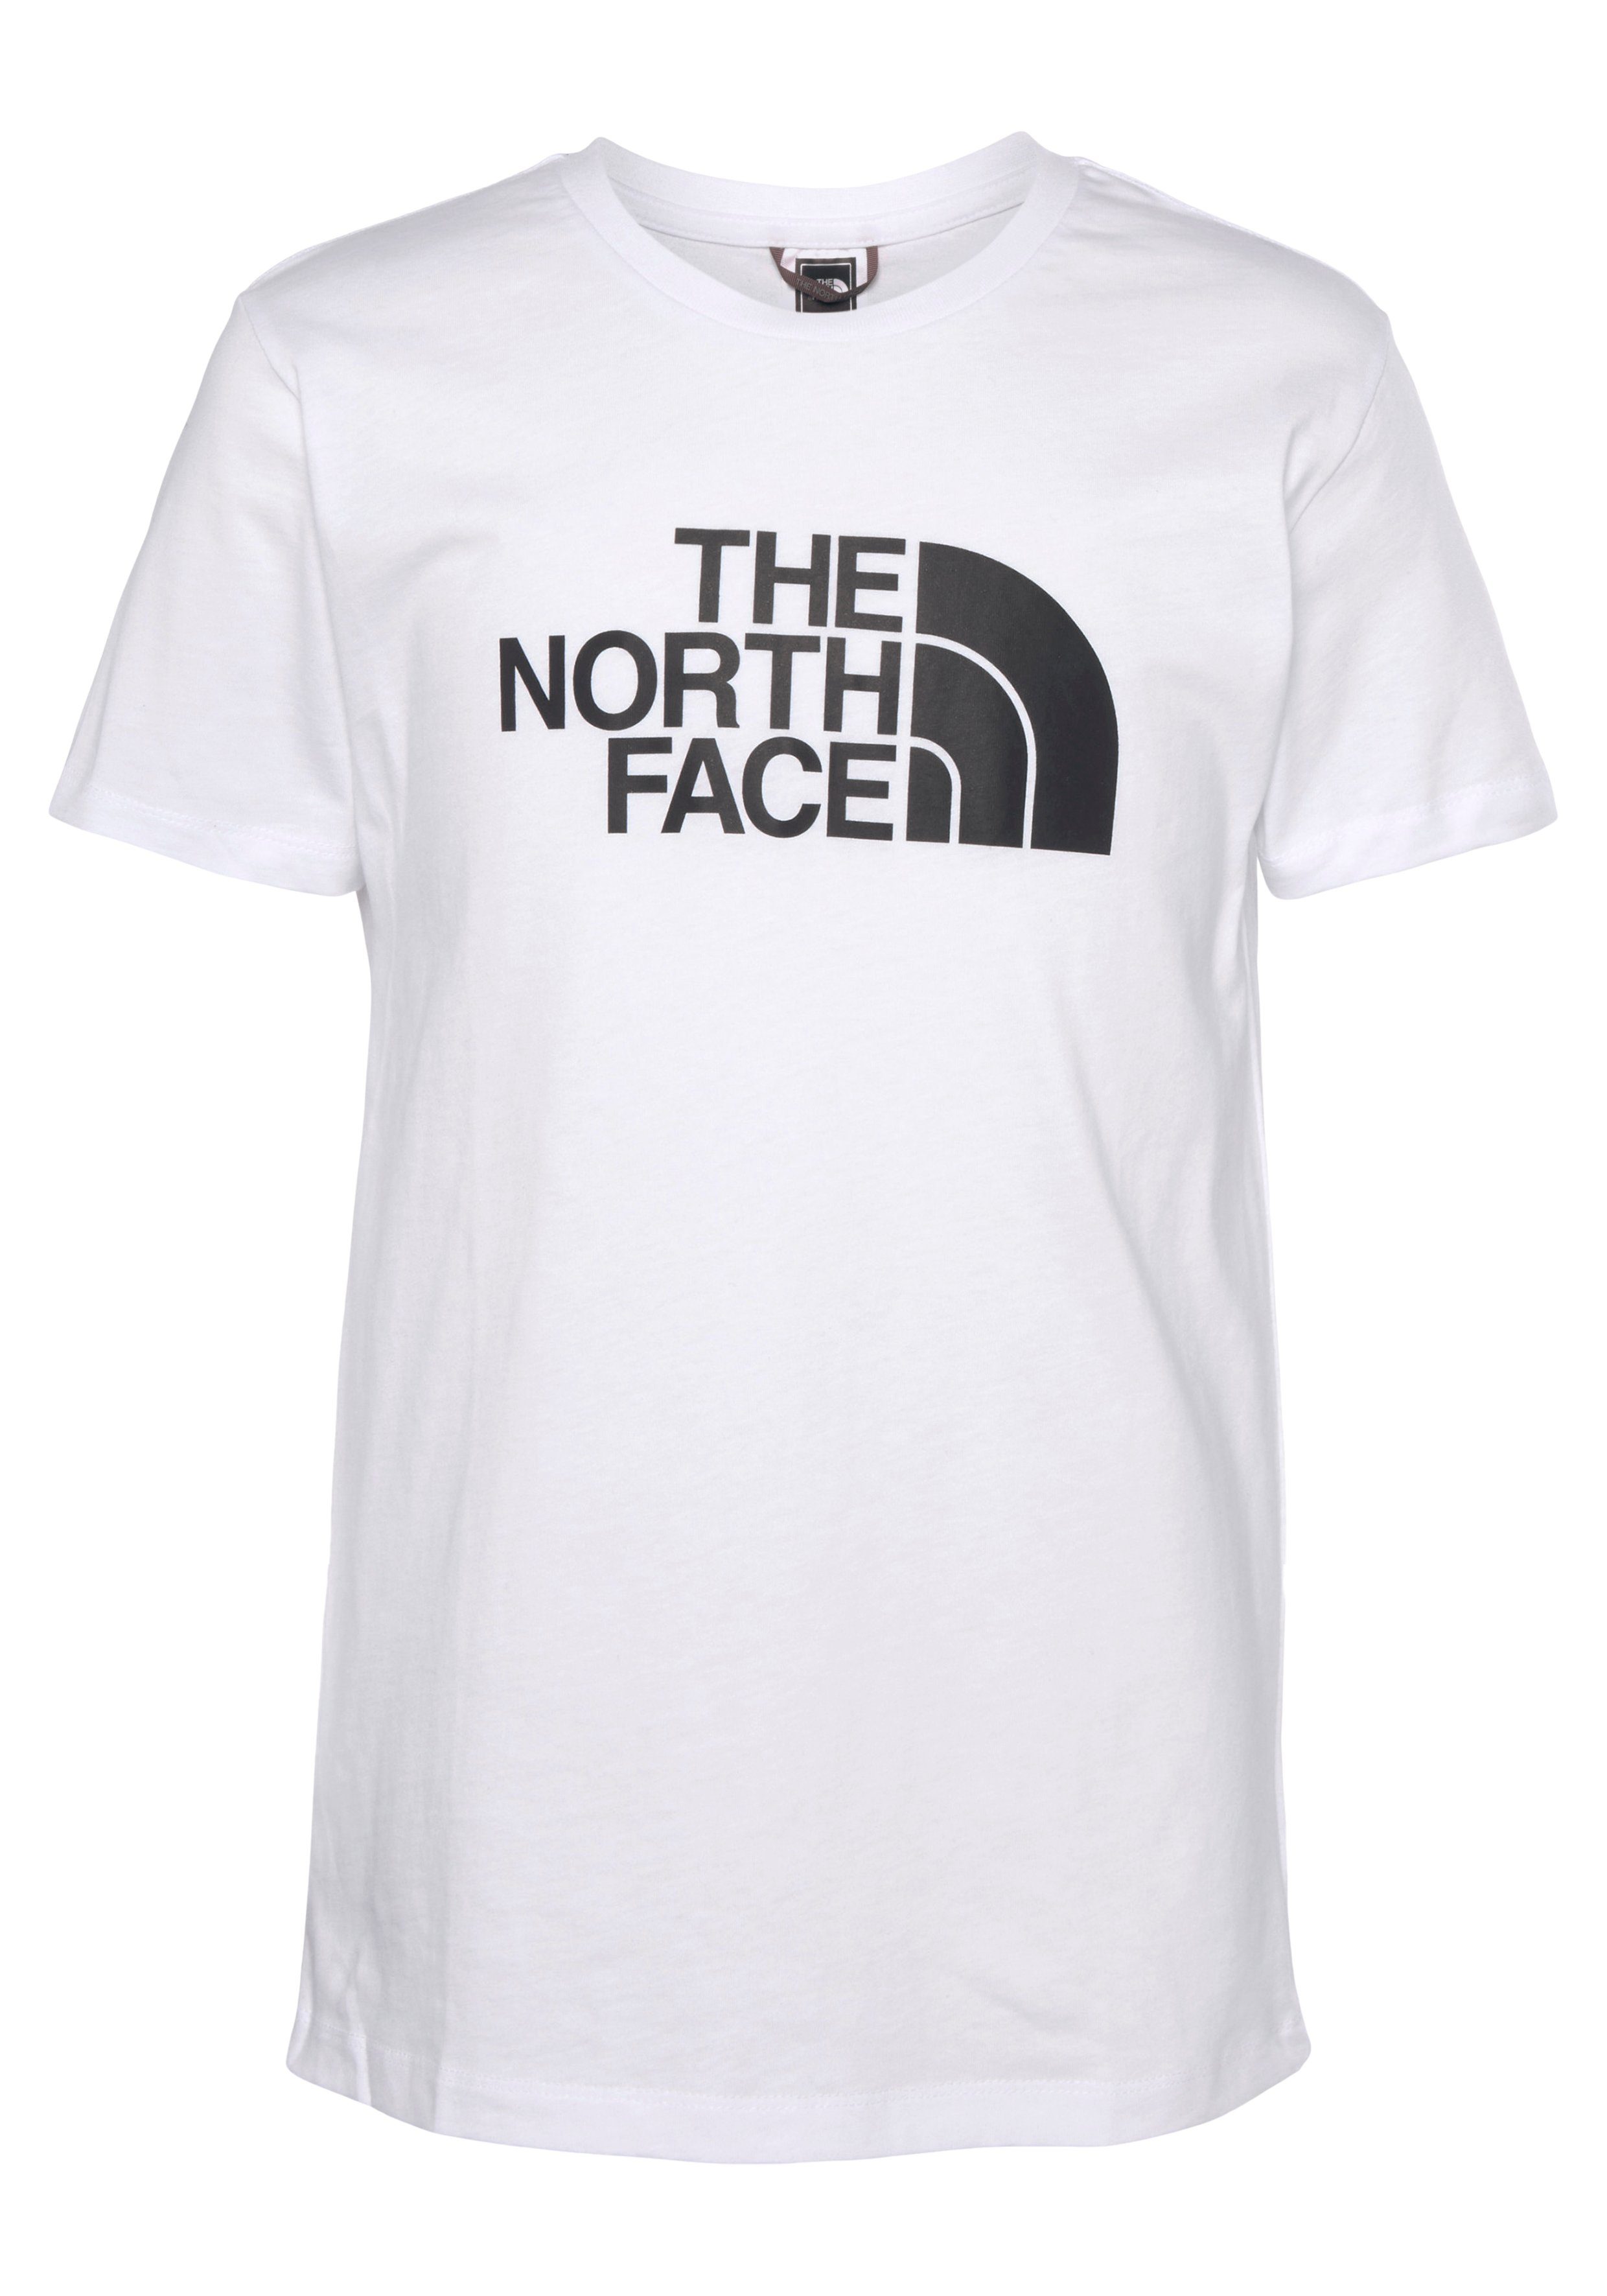 The North Face EASY TEE white - für T-Shirt Kinder